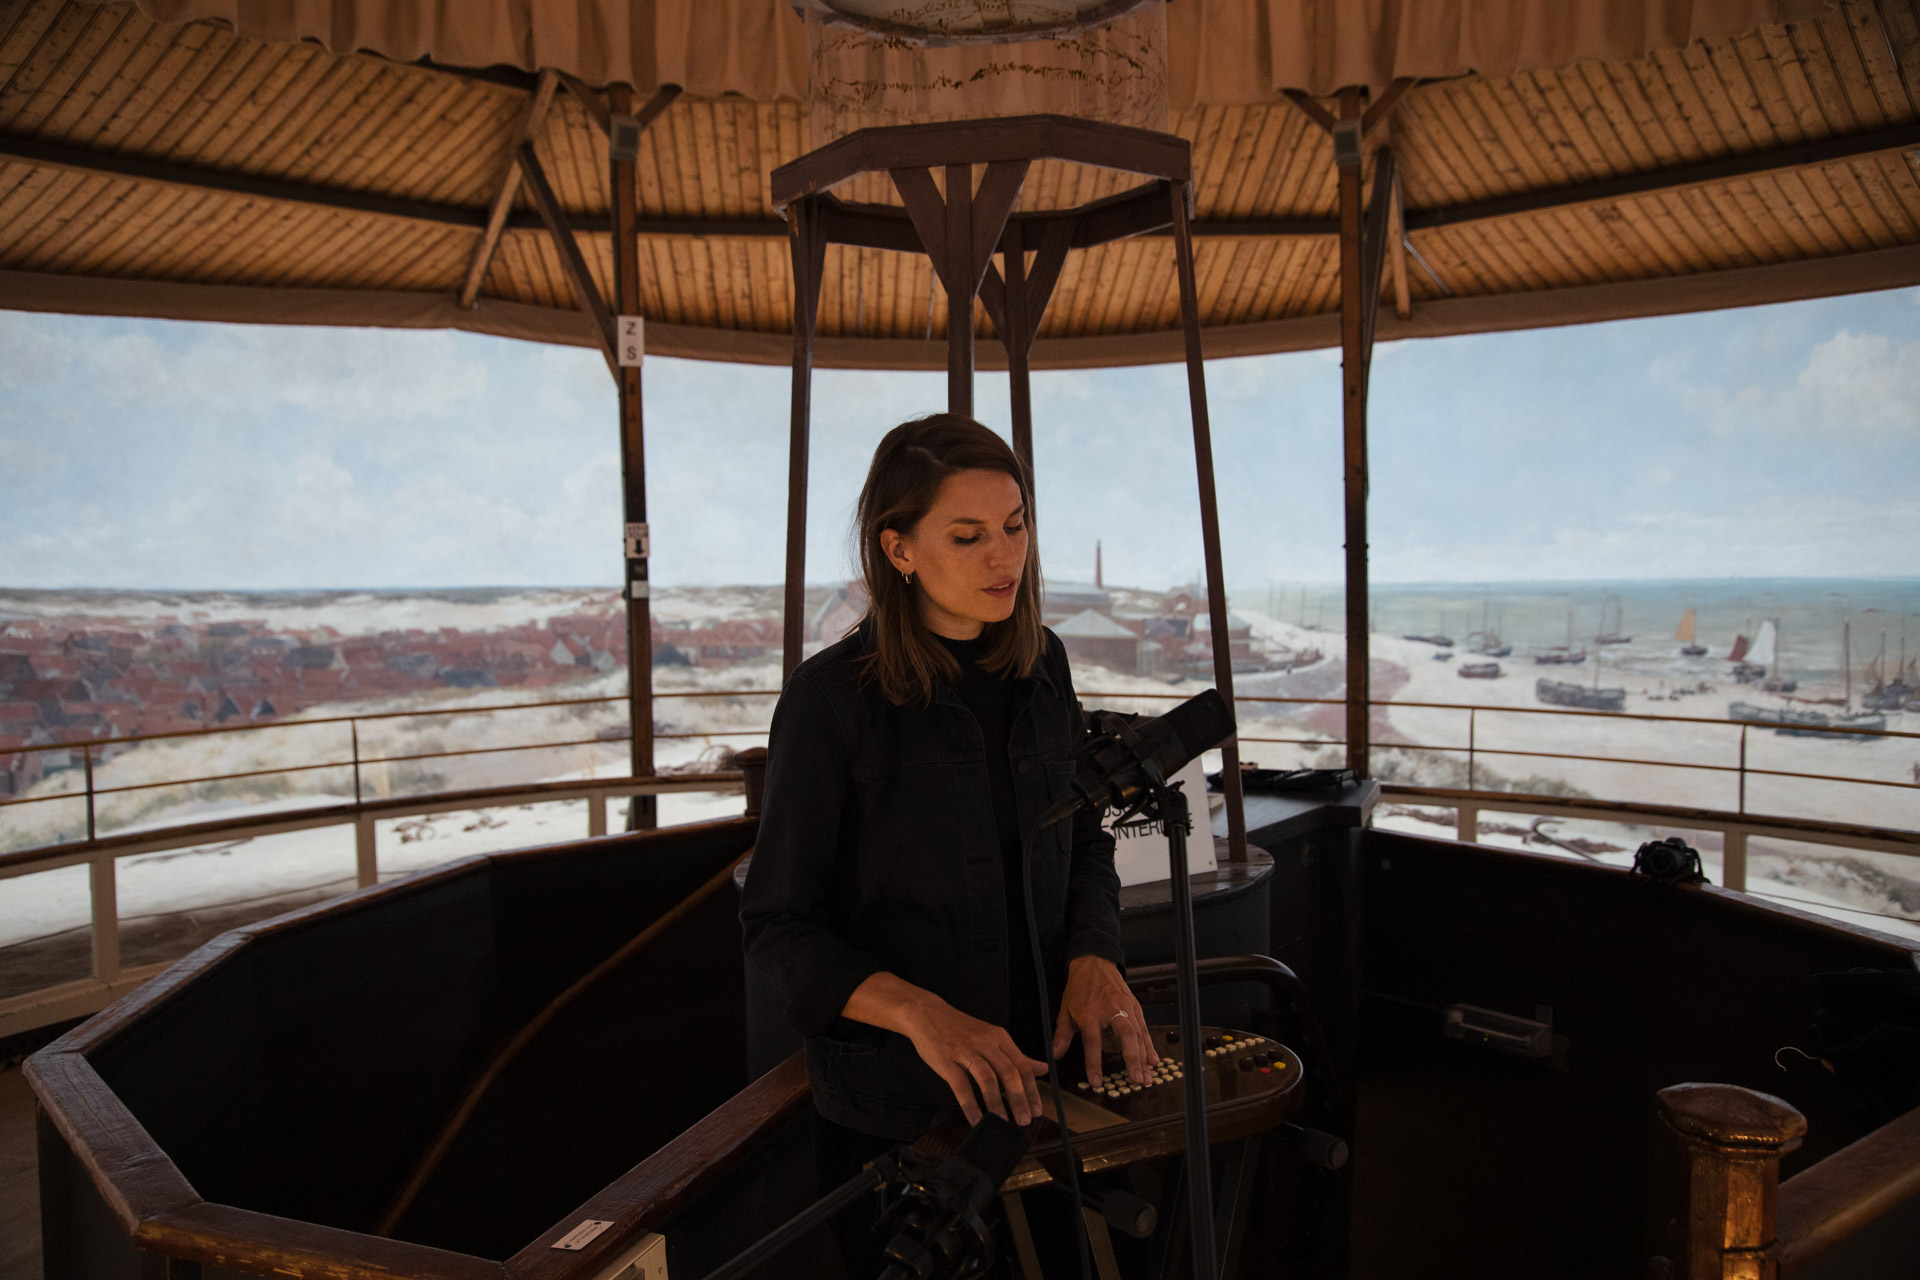 Sofie Winterson (by Matthijs van der Ven for The Influences) at Panorama Mesdag, The Hague